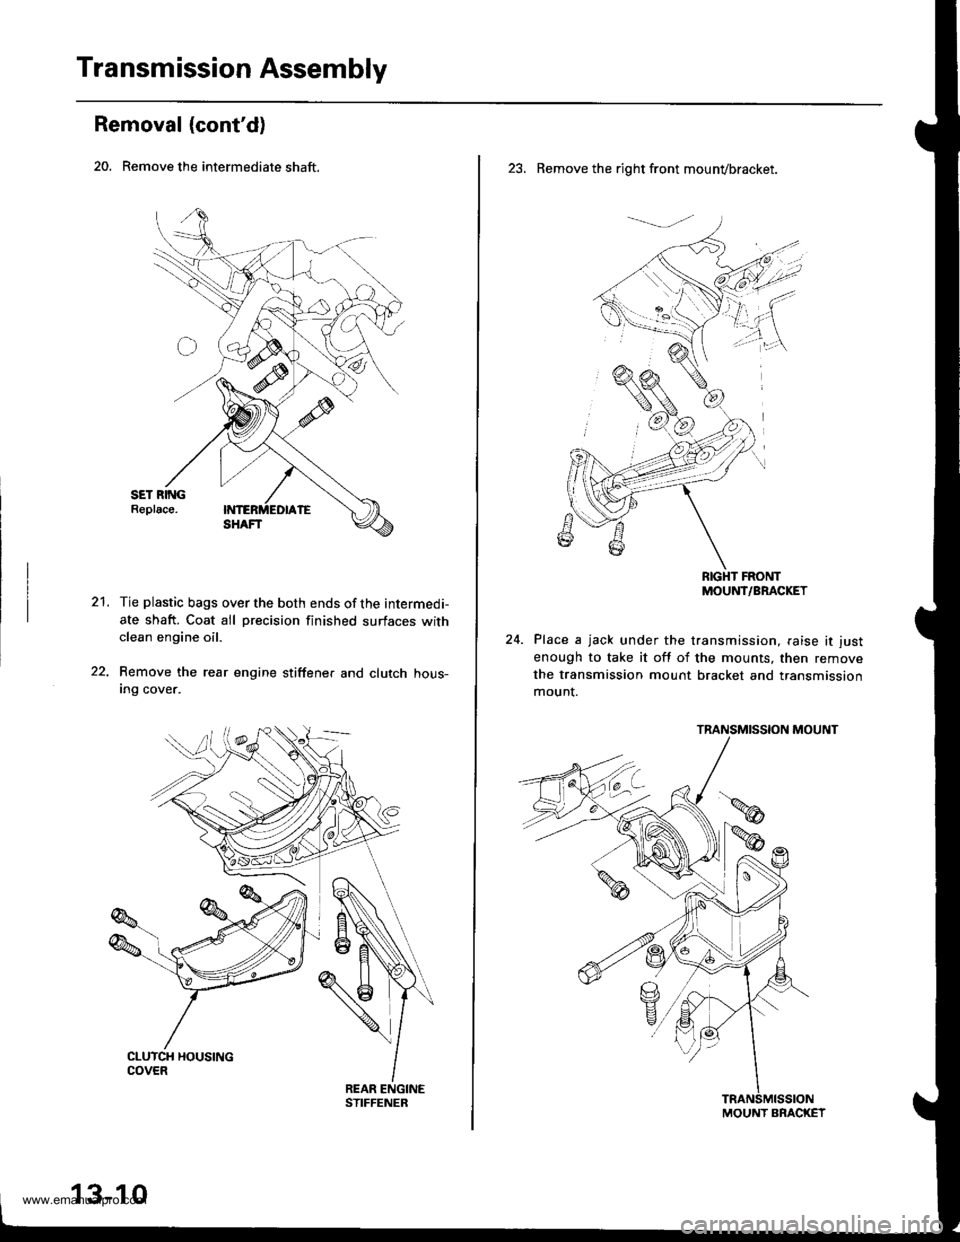 HONDA CR-V 1998 RD1-RD3 / 1.G Workshop Manual 
Transmission Assembly
Removal (contd)
20. Remove the intermediate shaft.
21.Tie plastic bags over the both ends of the intermedi-
ate shaft. Coat all precision finished surfaces withclean engine oil